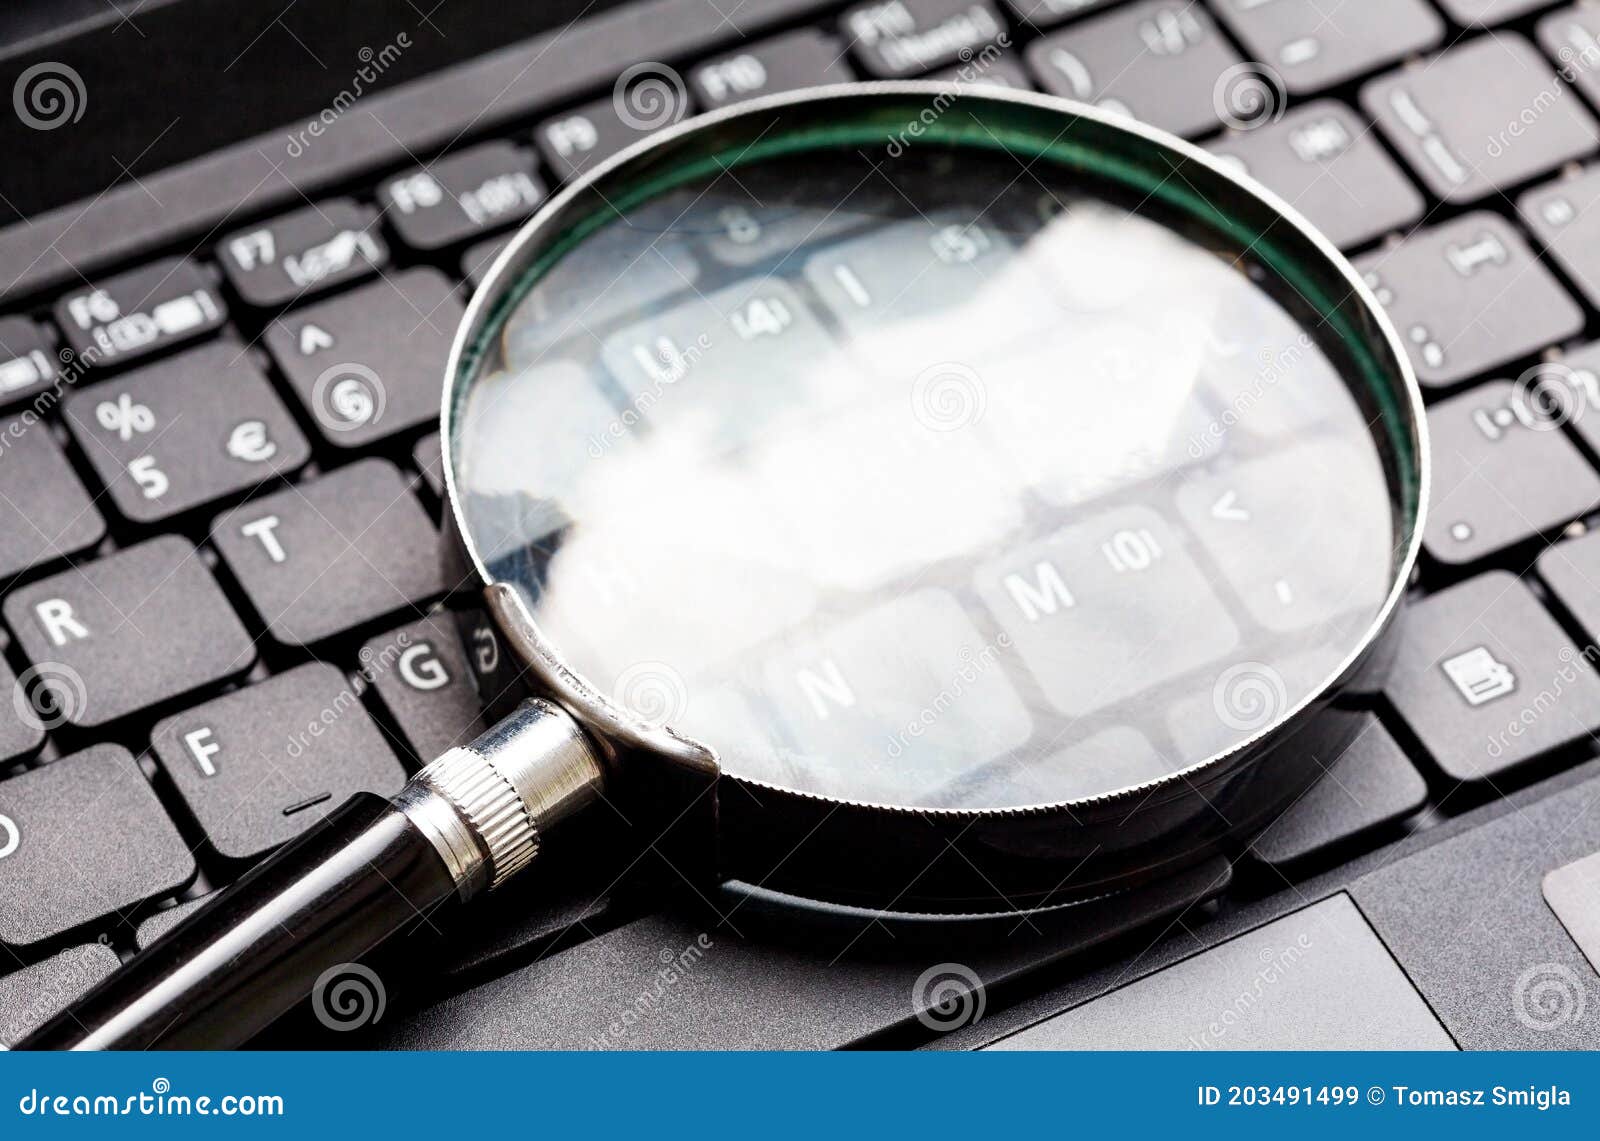 magnifying glass laying on a laptop keyboard. loupe on a netbook keys.technology file search tool concept, data forensics